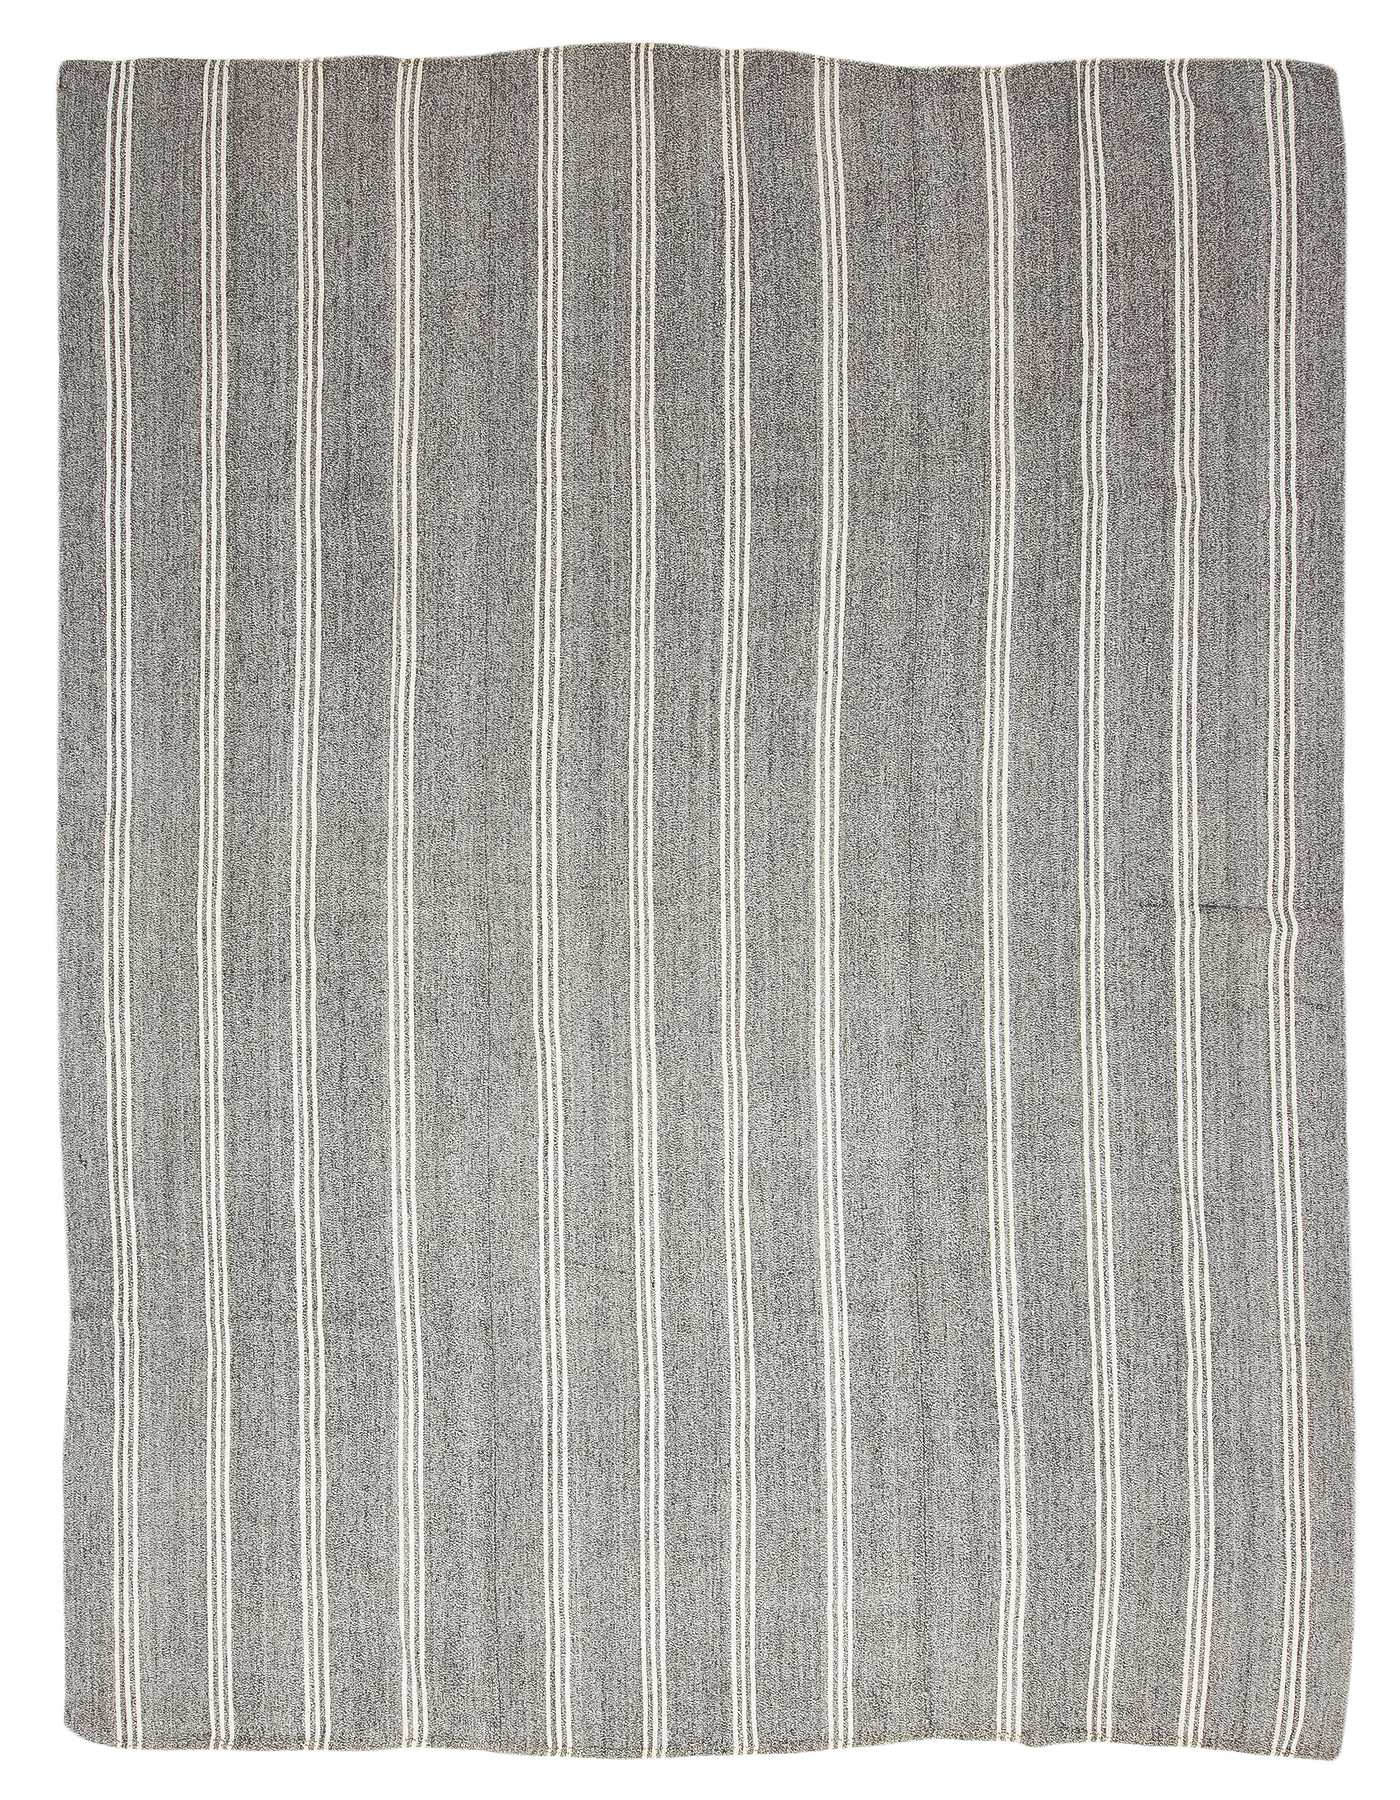 Hanne Rug 200x300 cm, Grey/Off-white - Jakobsdals @